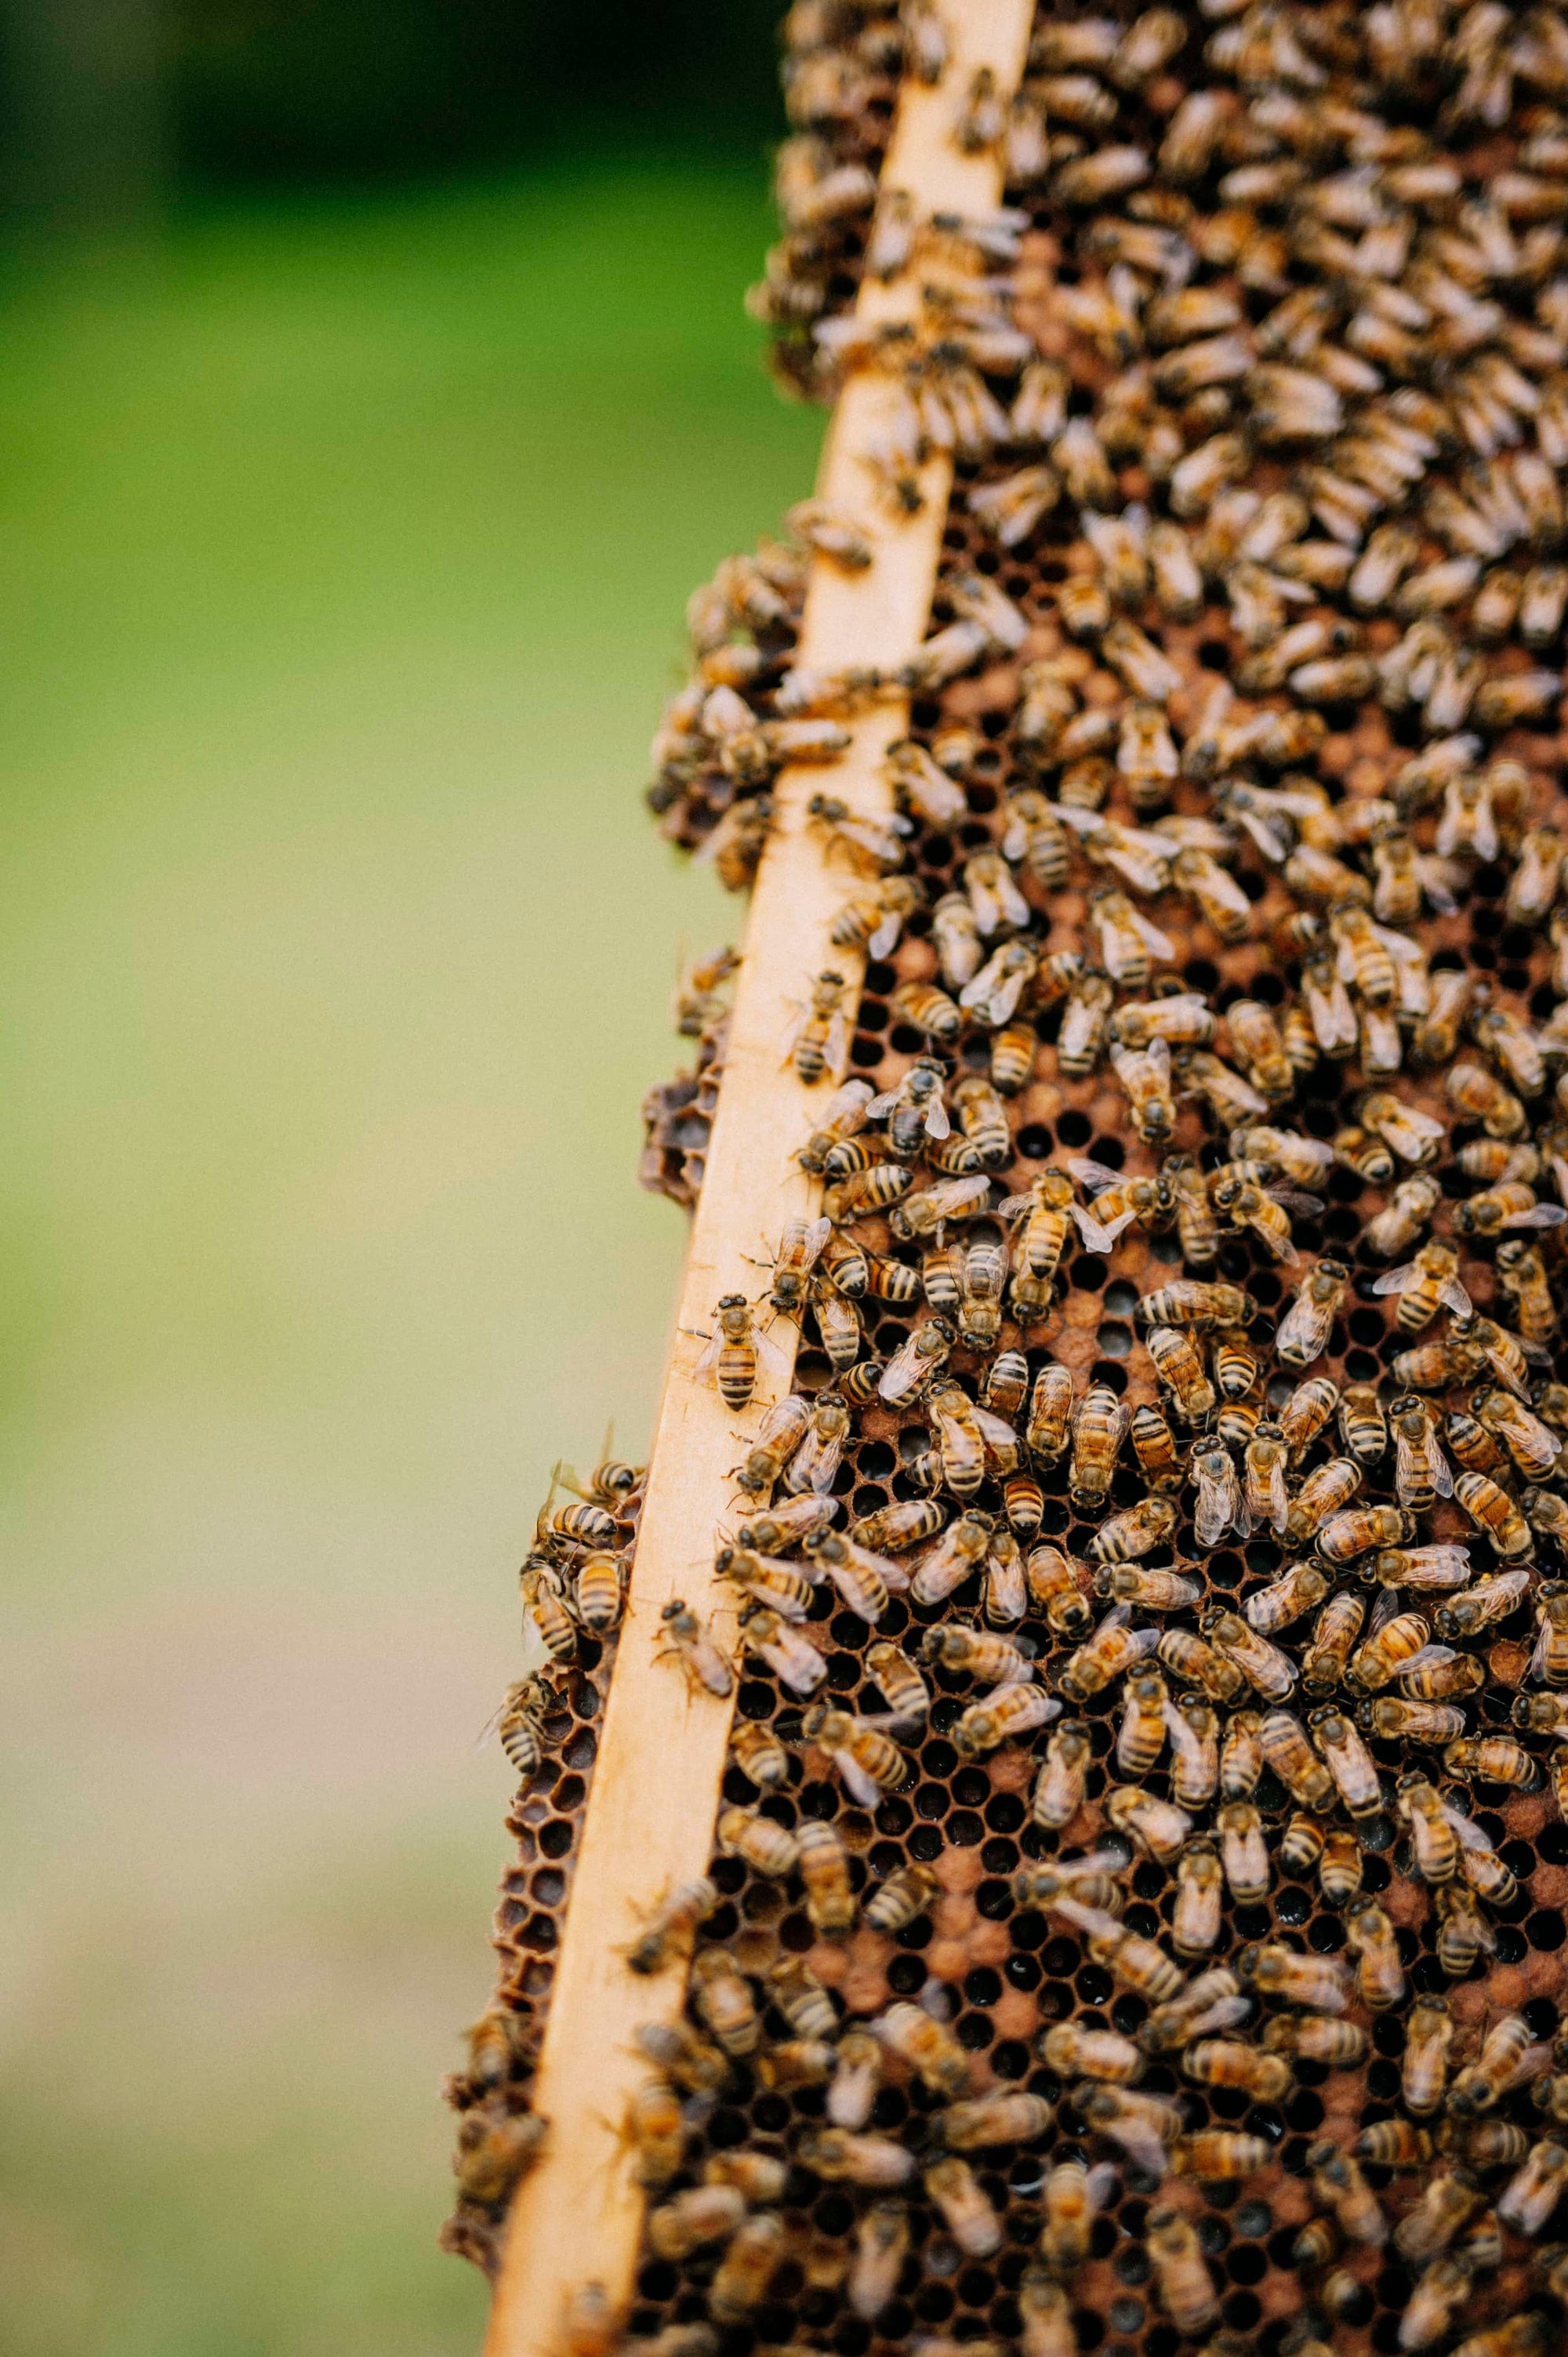 Hundreds of bees holding onto a beehive